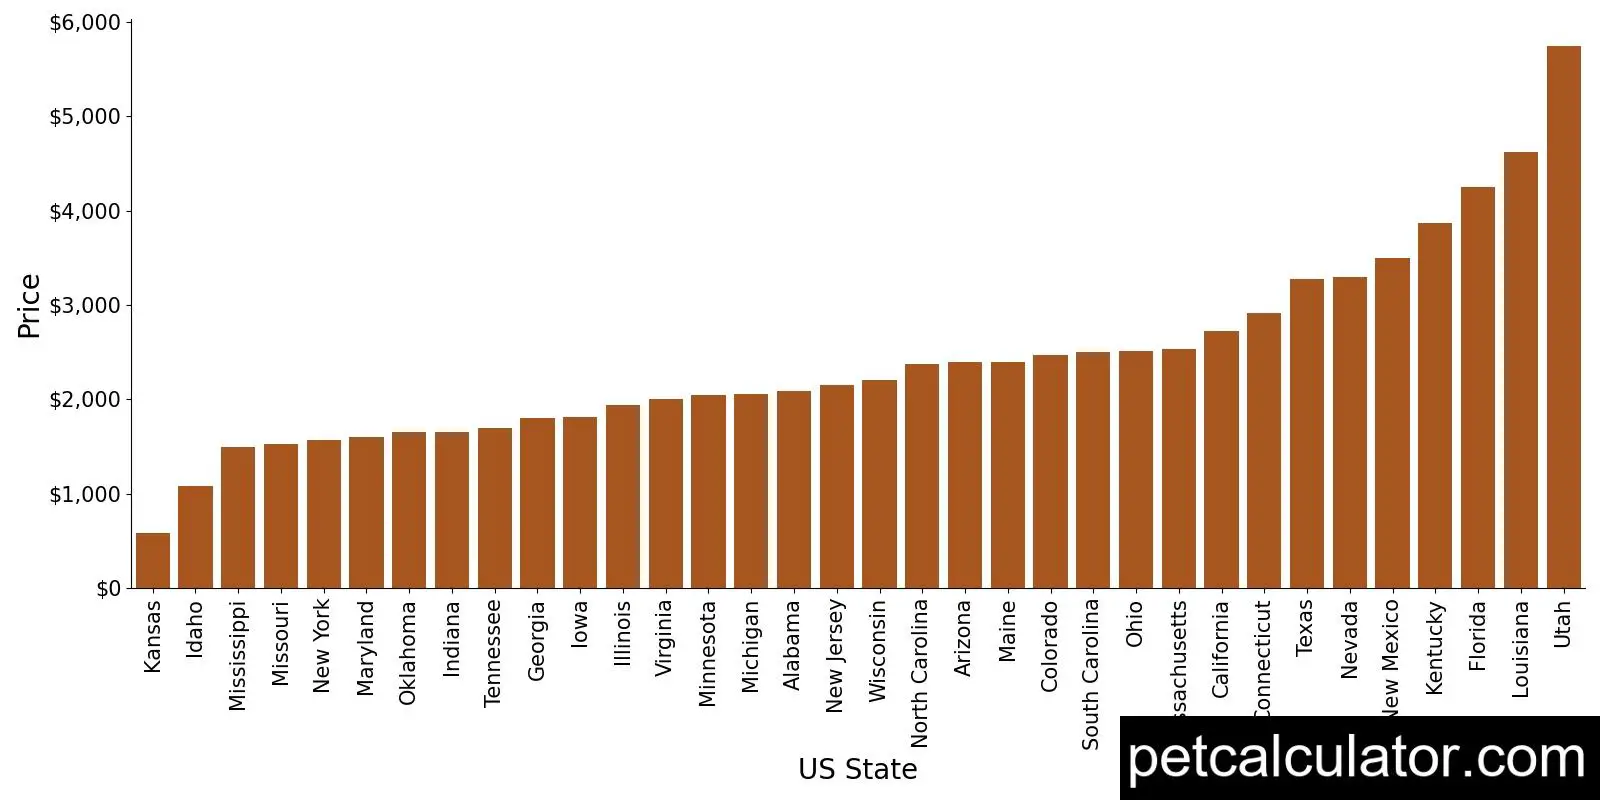 Price of Olde English Bulldogge by US State 